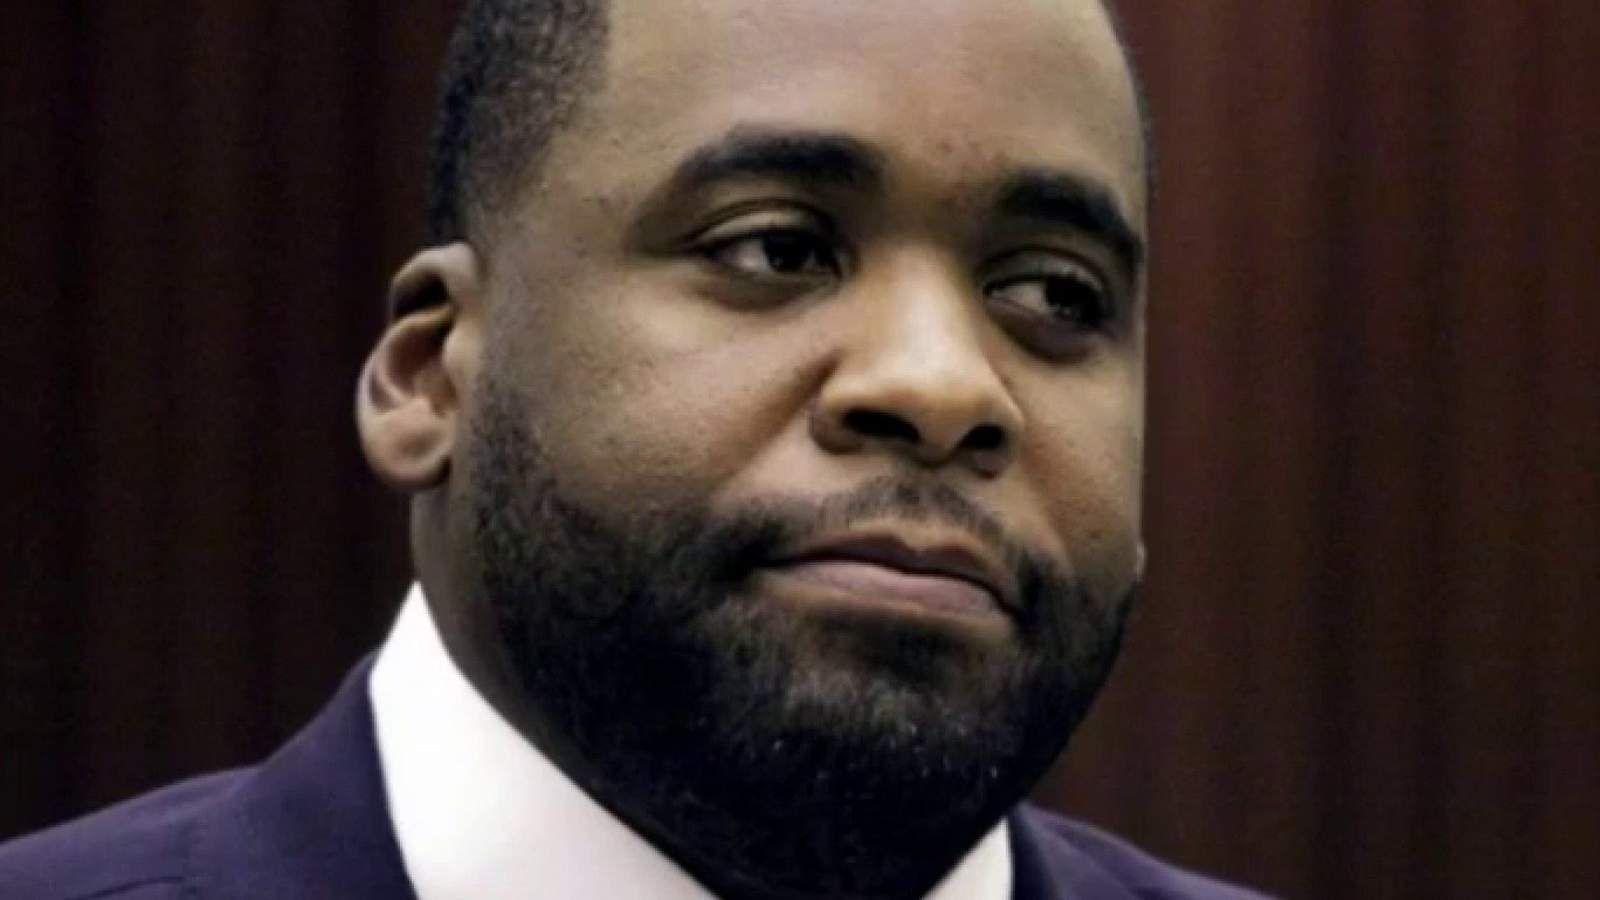 Key people in Kwame Kilpatrick’s life and career: Where are they now?